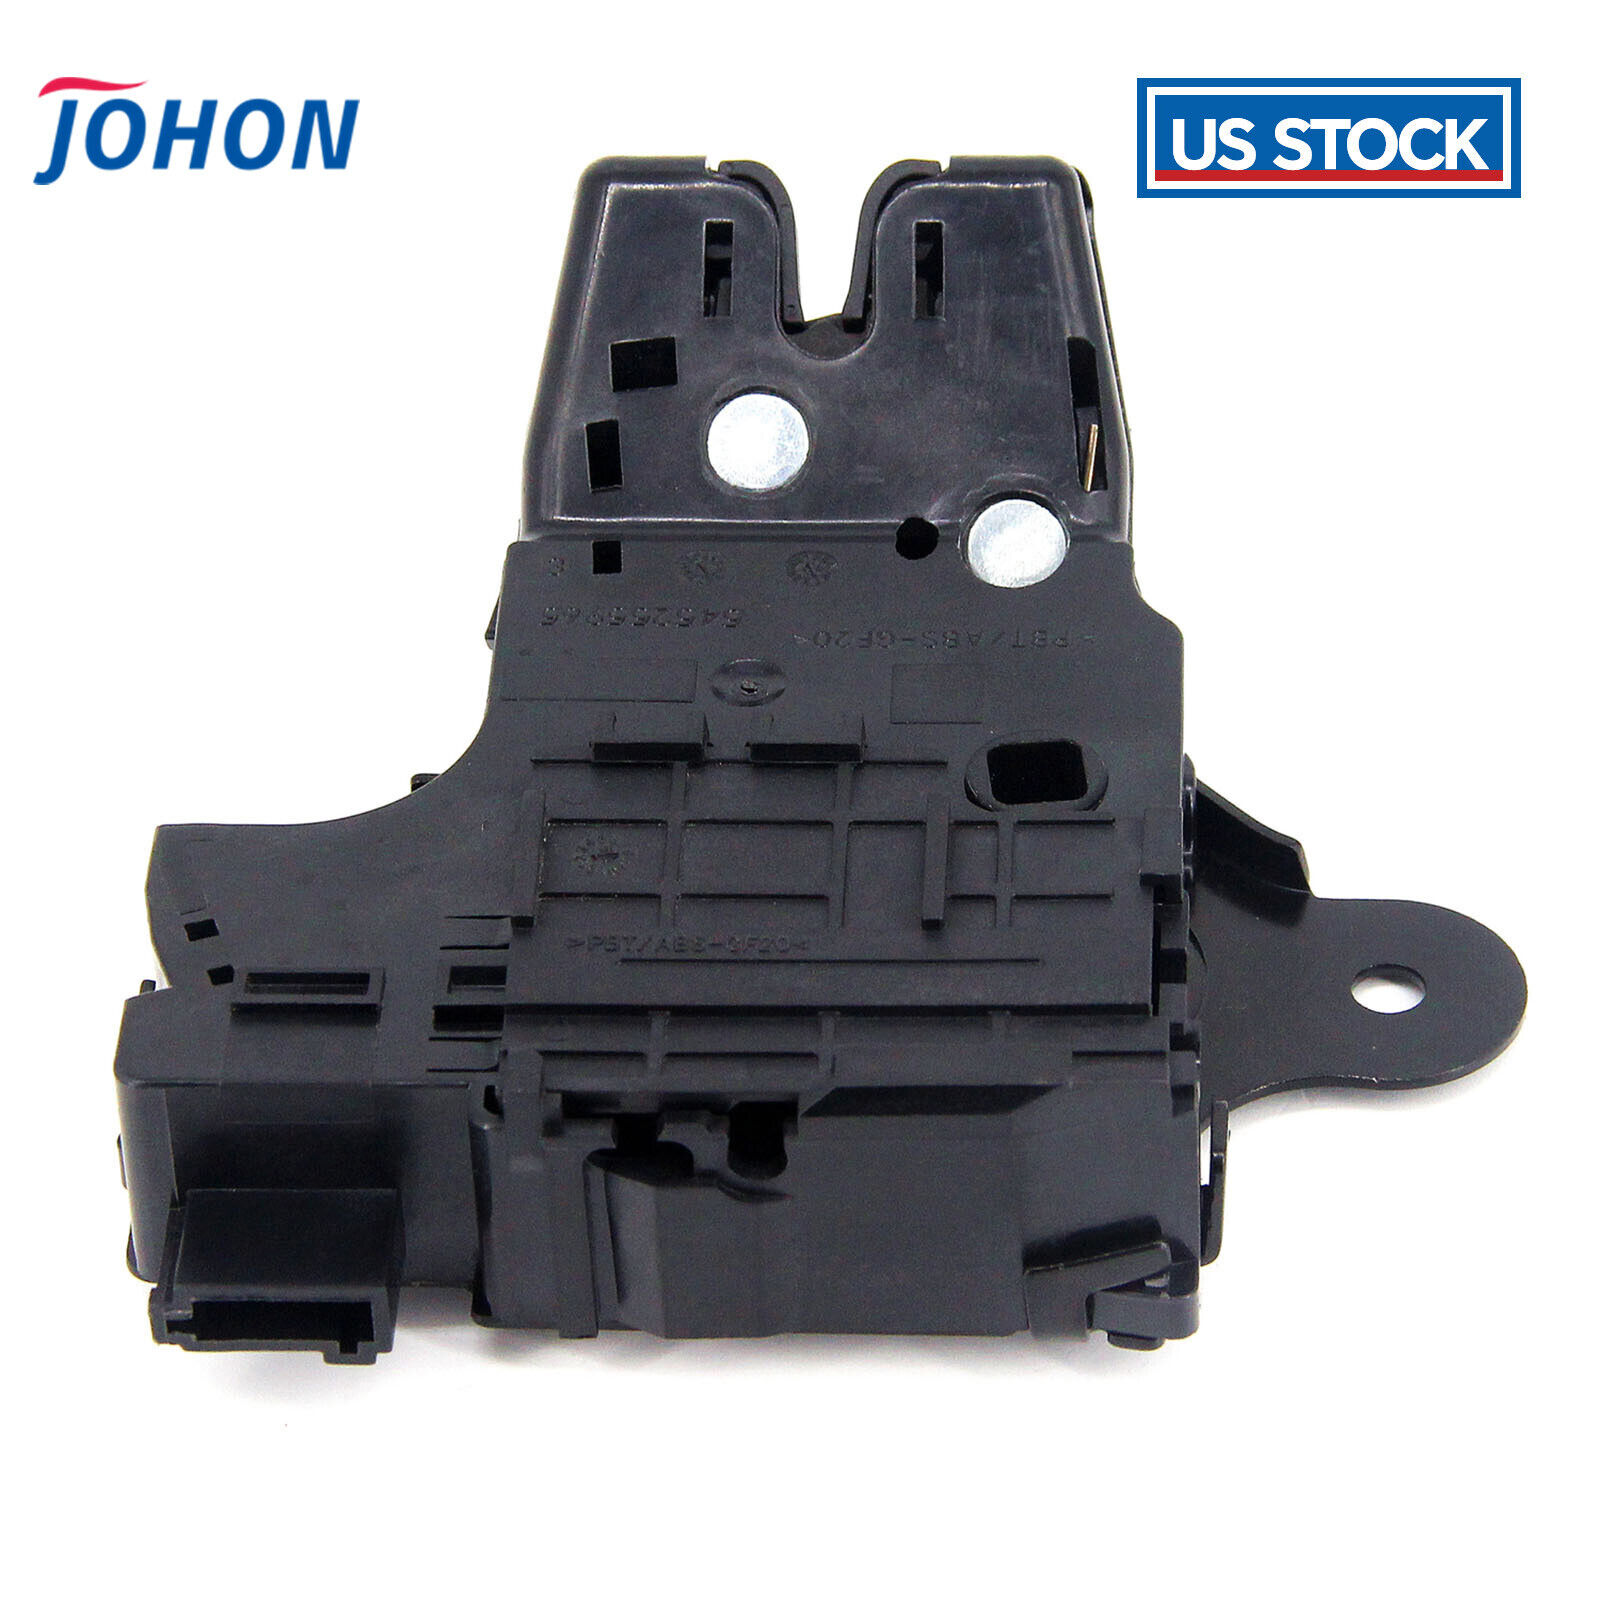 Trunk Latch Assy GM NEW OEM 13501988 (2015-2018) Cadillac, Buick, Chevy Models)